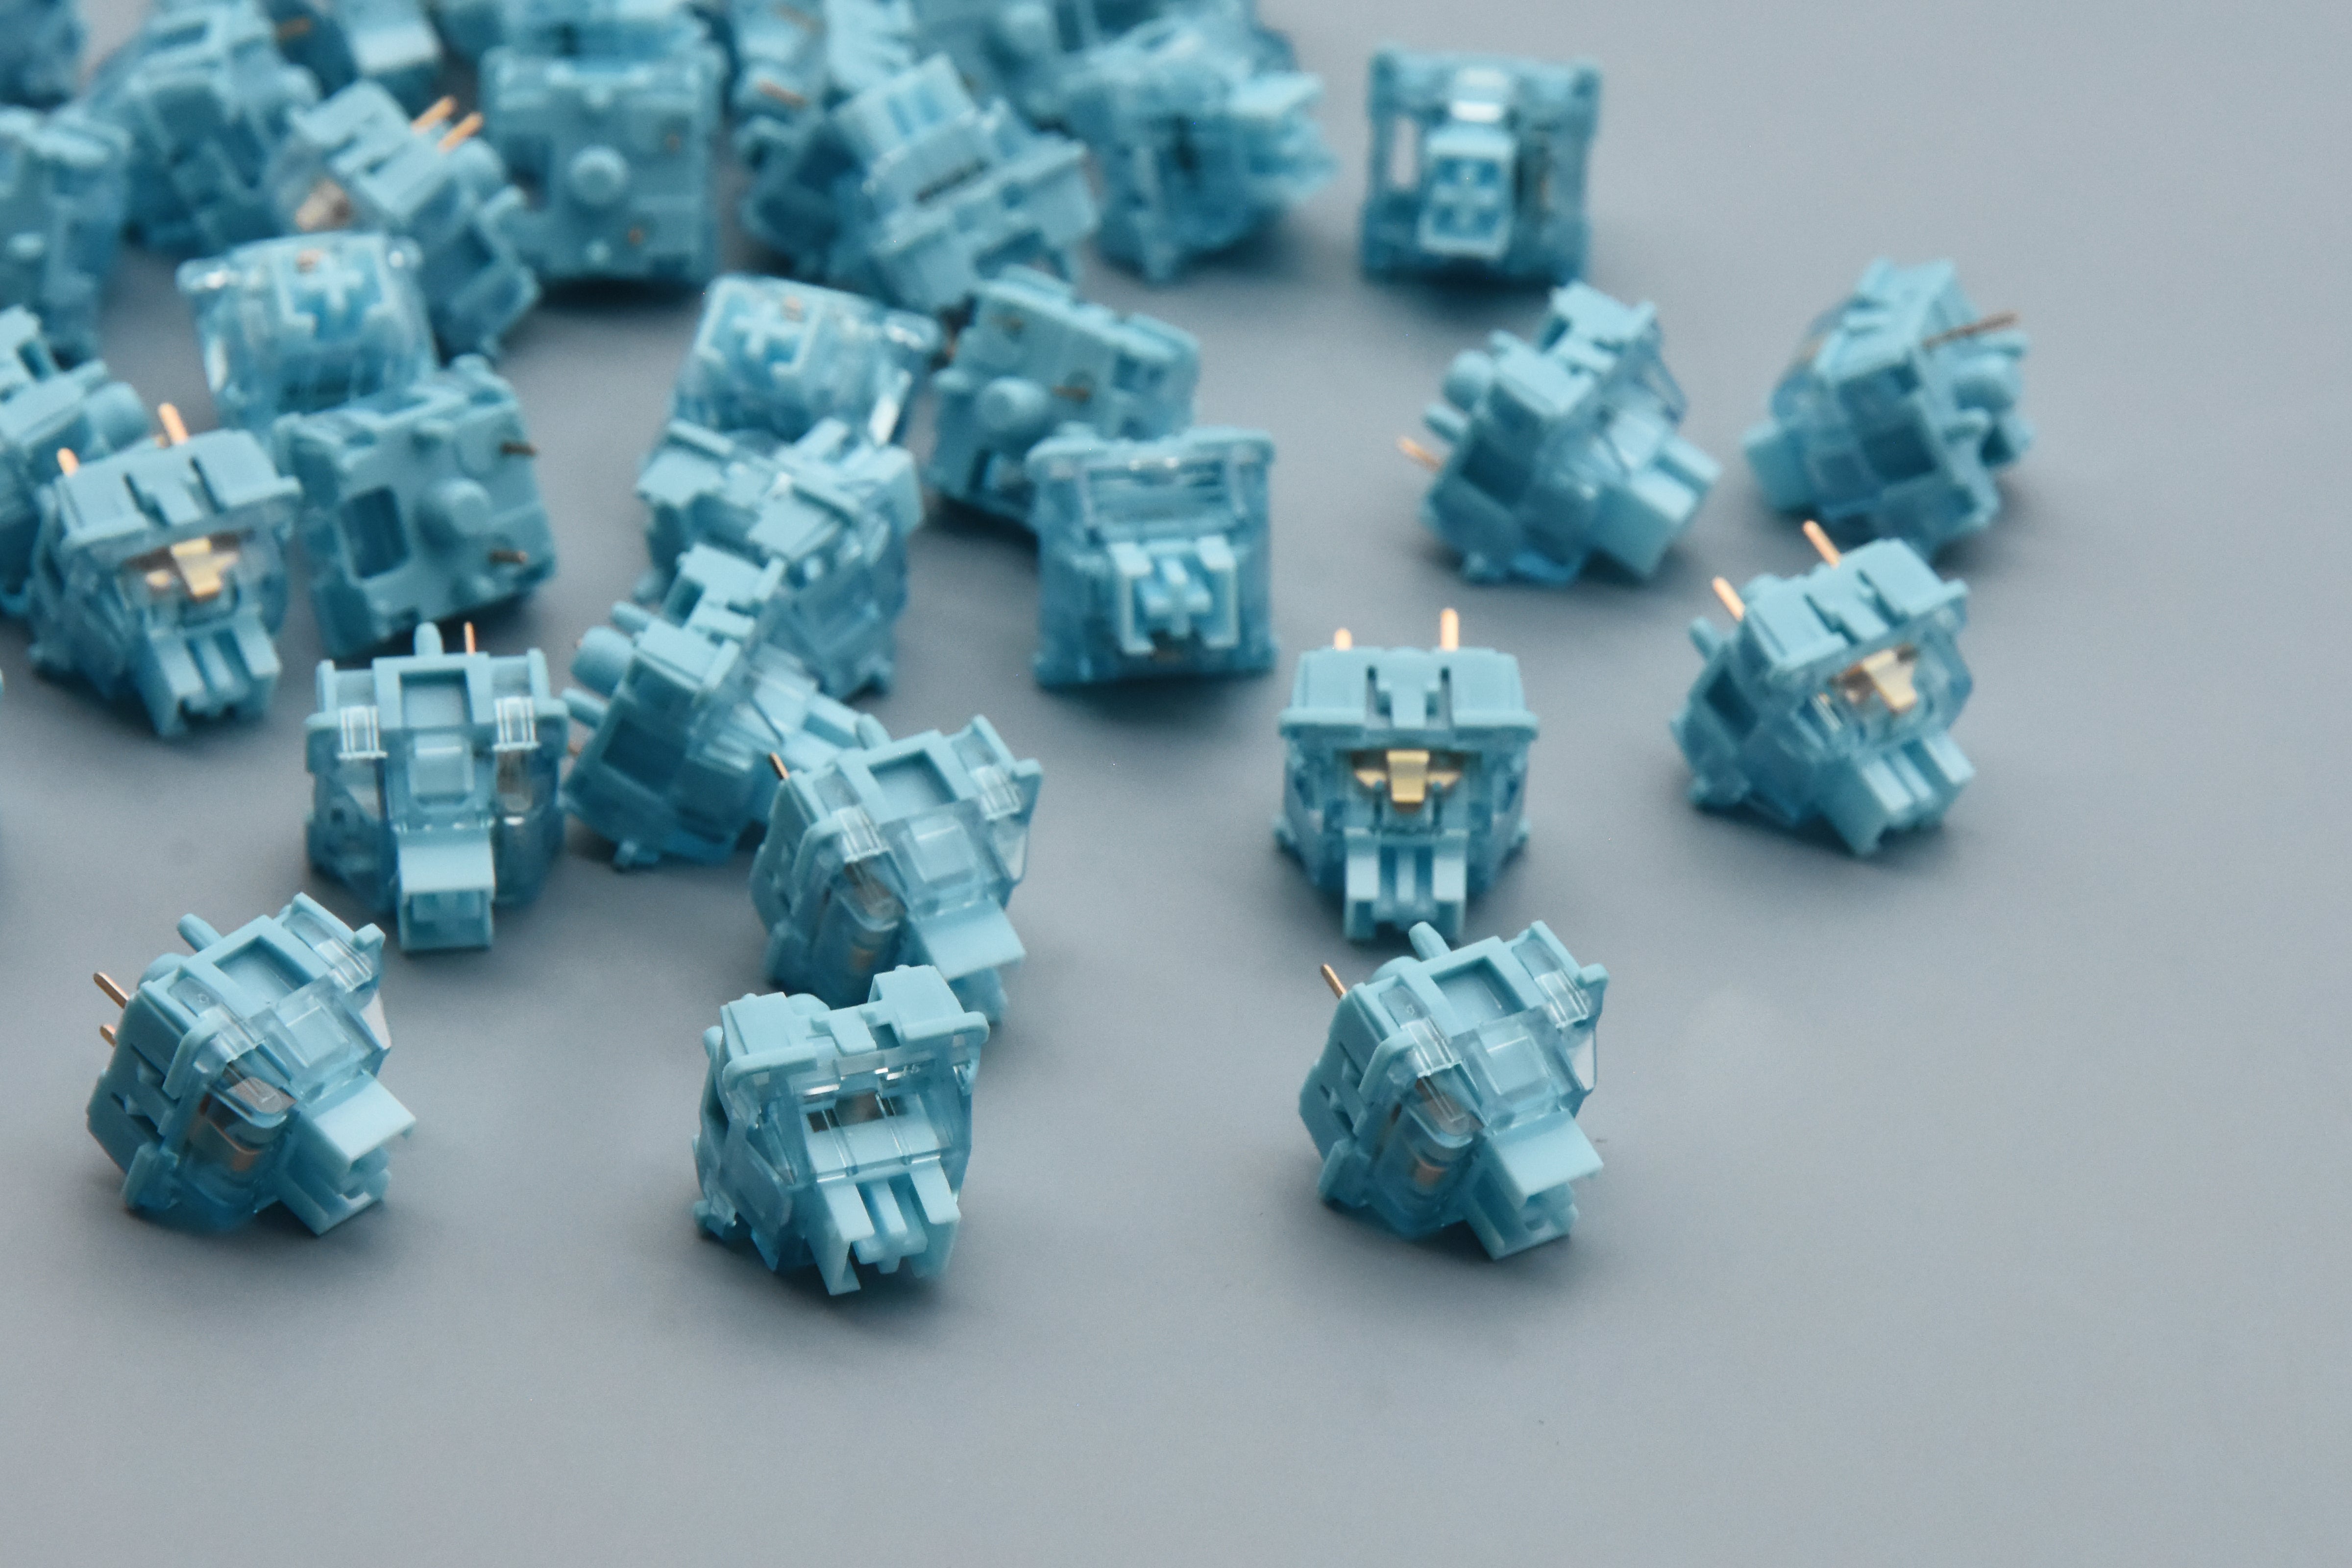 AKKO V3 CREAM BLUE PRO TACTILE SWITCH FACTORY LUBED EDITION (10PCS)